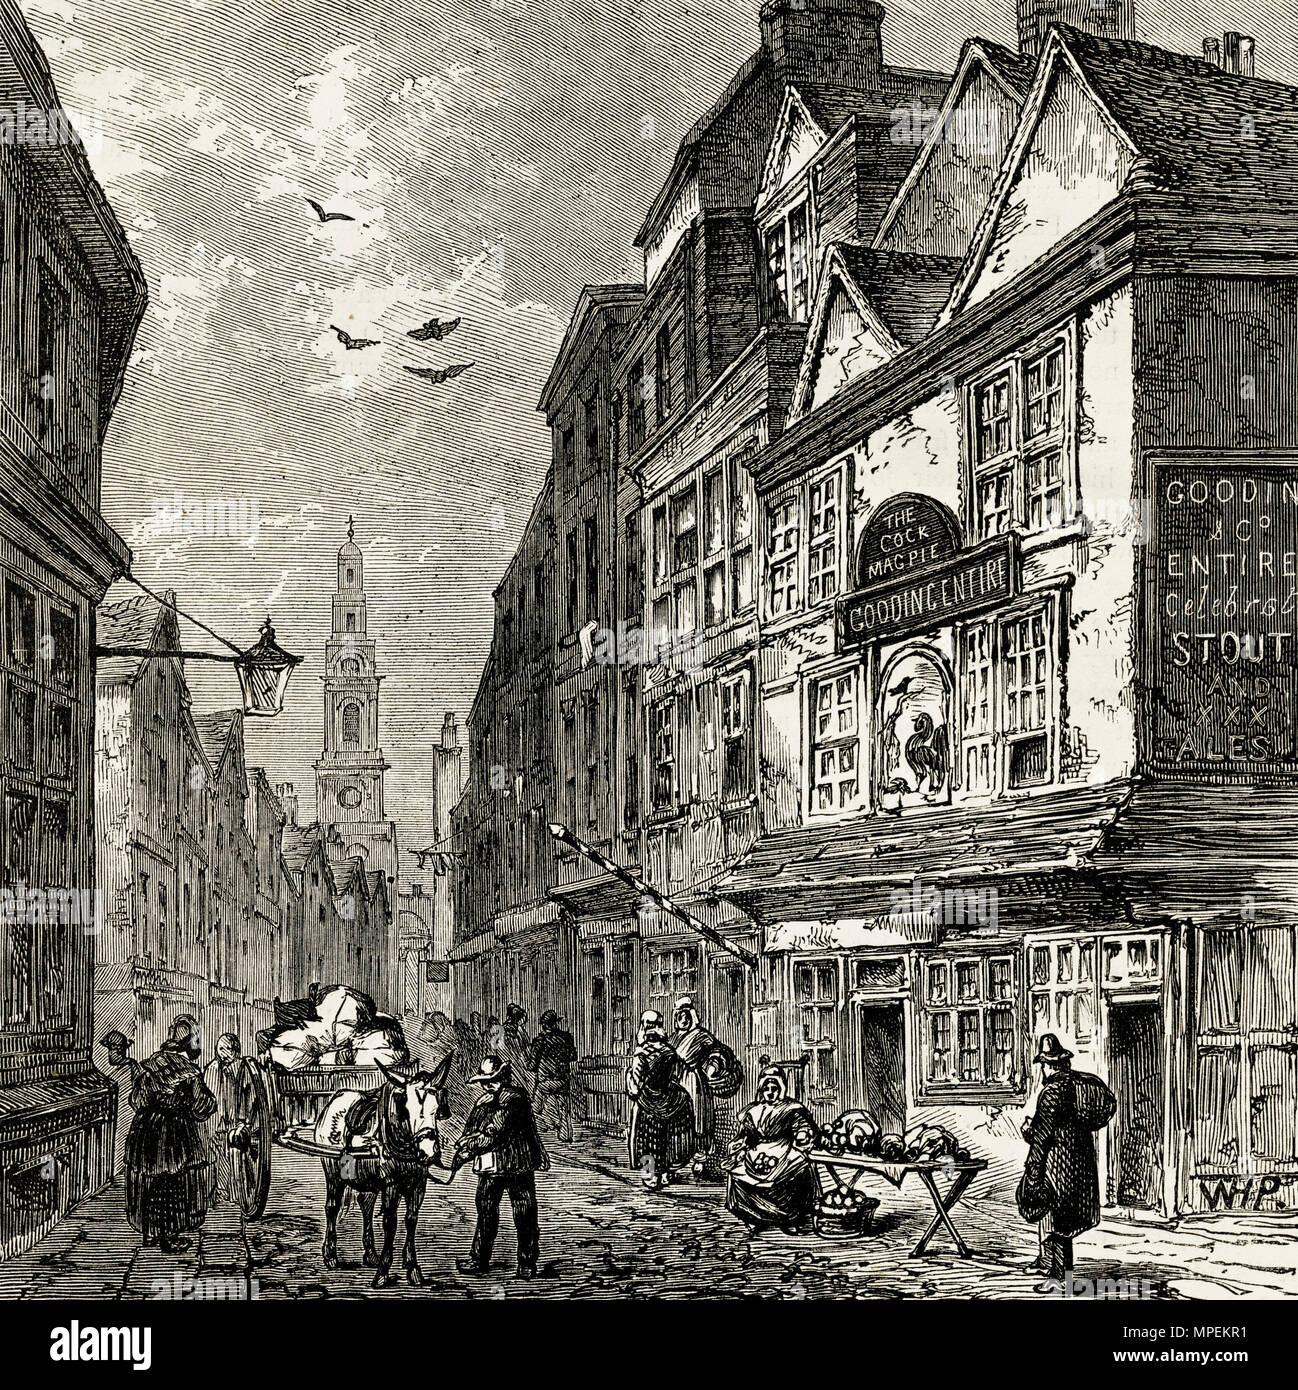 Cock and Magpie tavern Drury Lane London England UK pictured in 1840. 19th century Victorian engraving circa 1878 Stock Photo